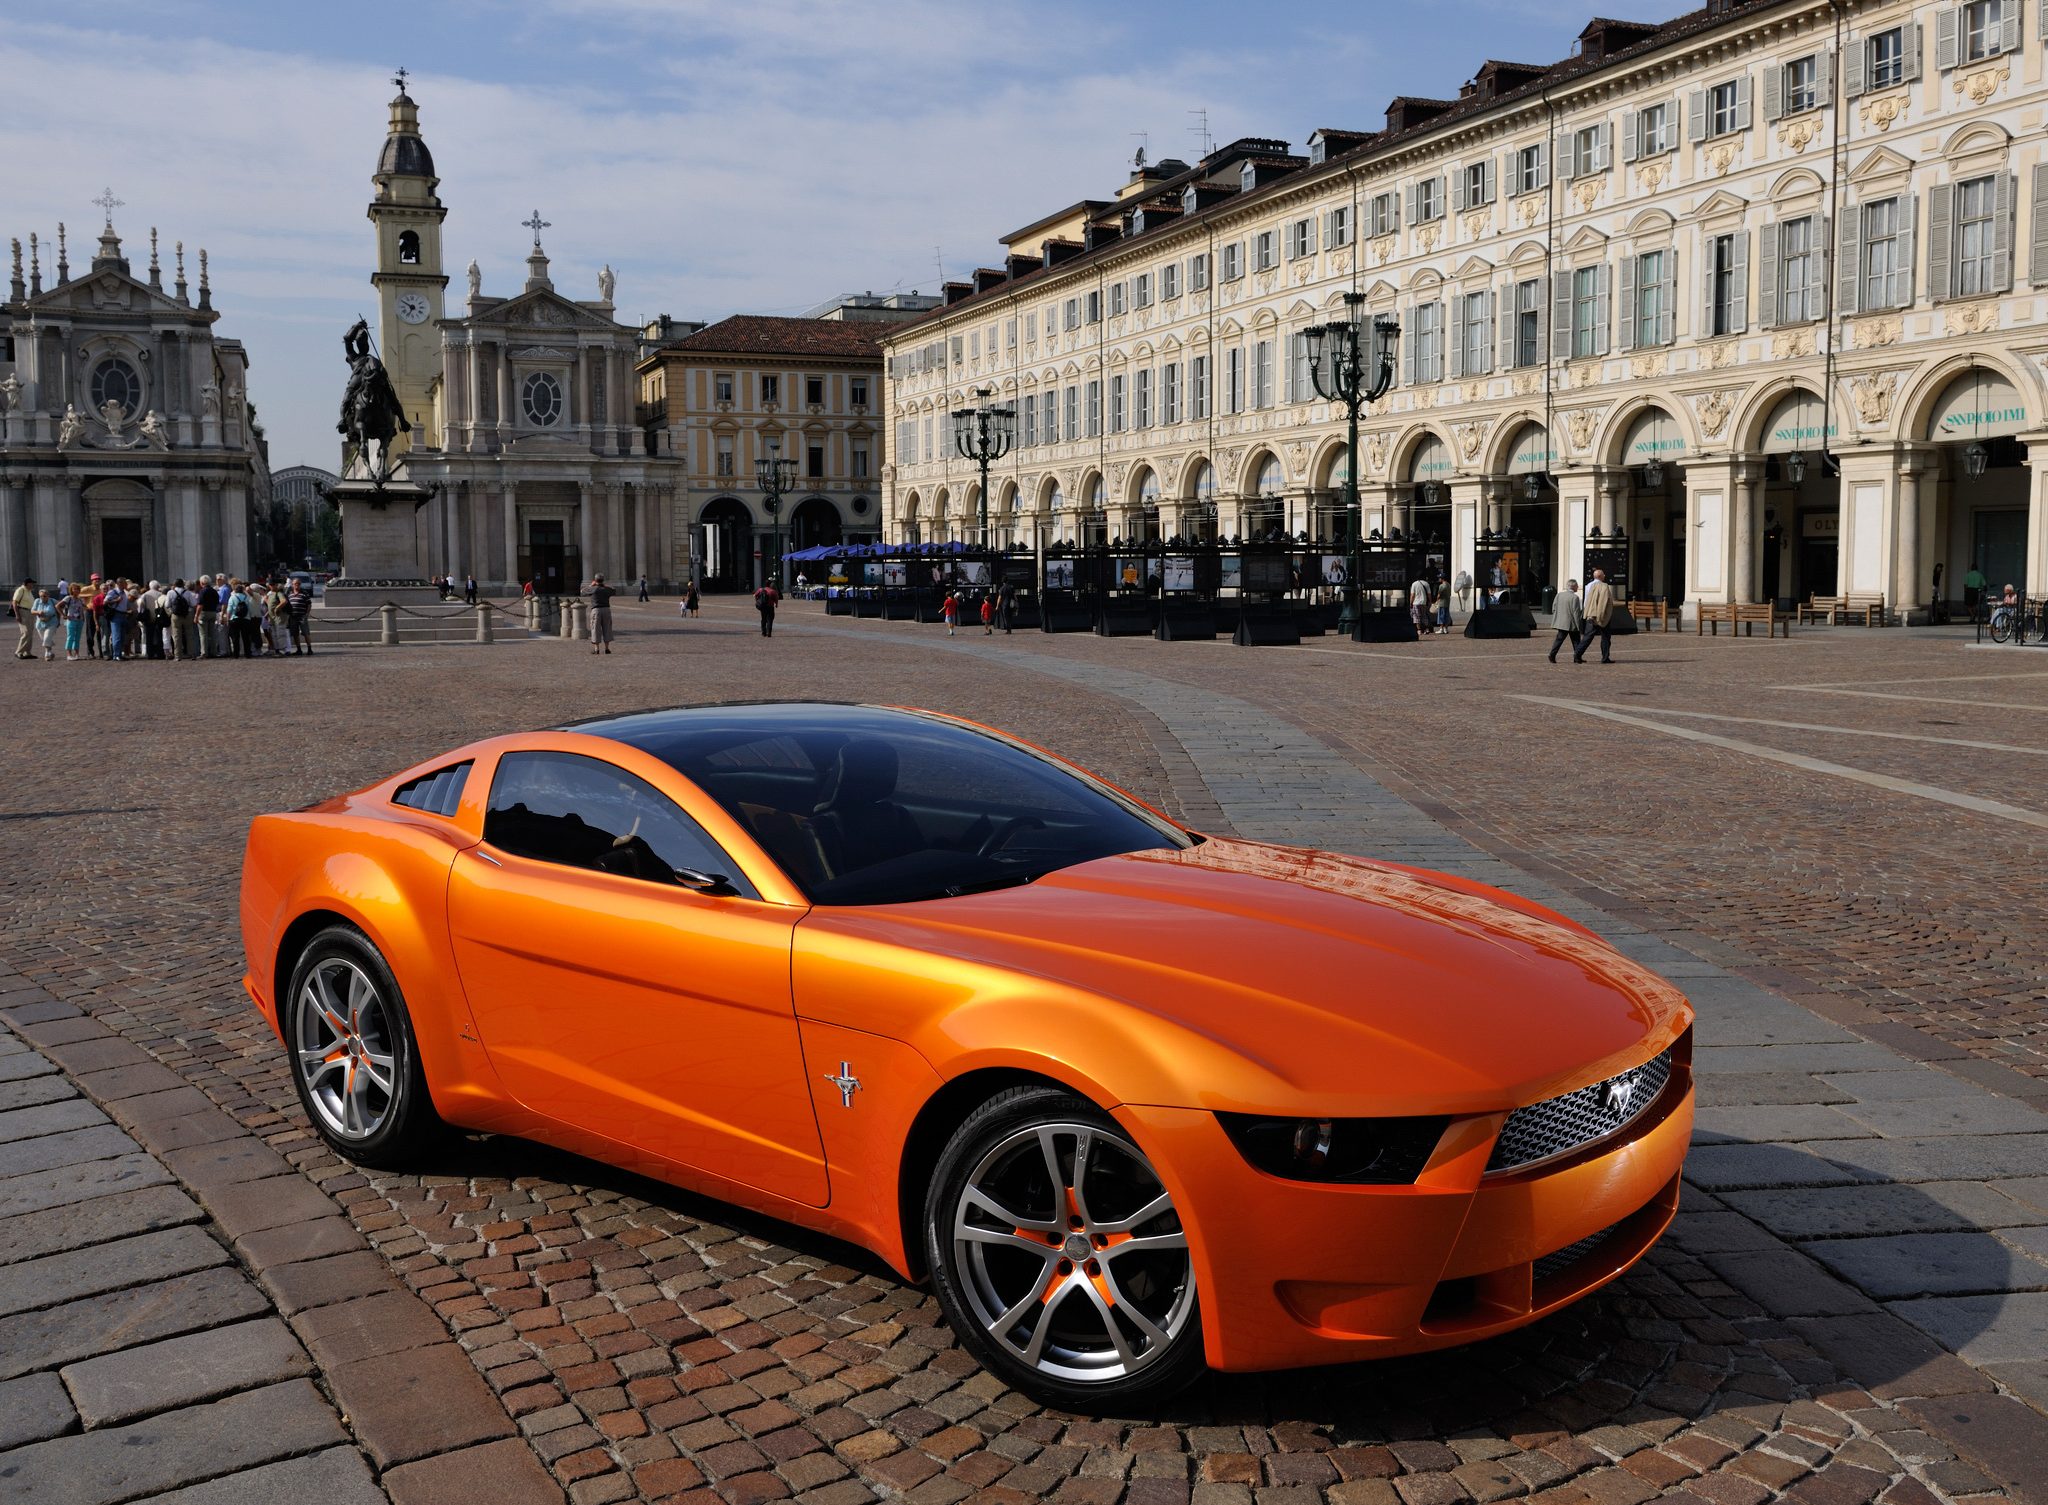 Mustang Of The Day: 2006 Ford Mustang Giugiaro Concept